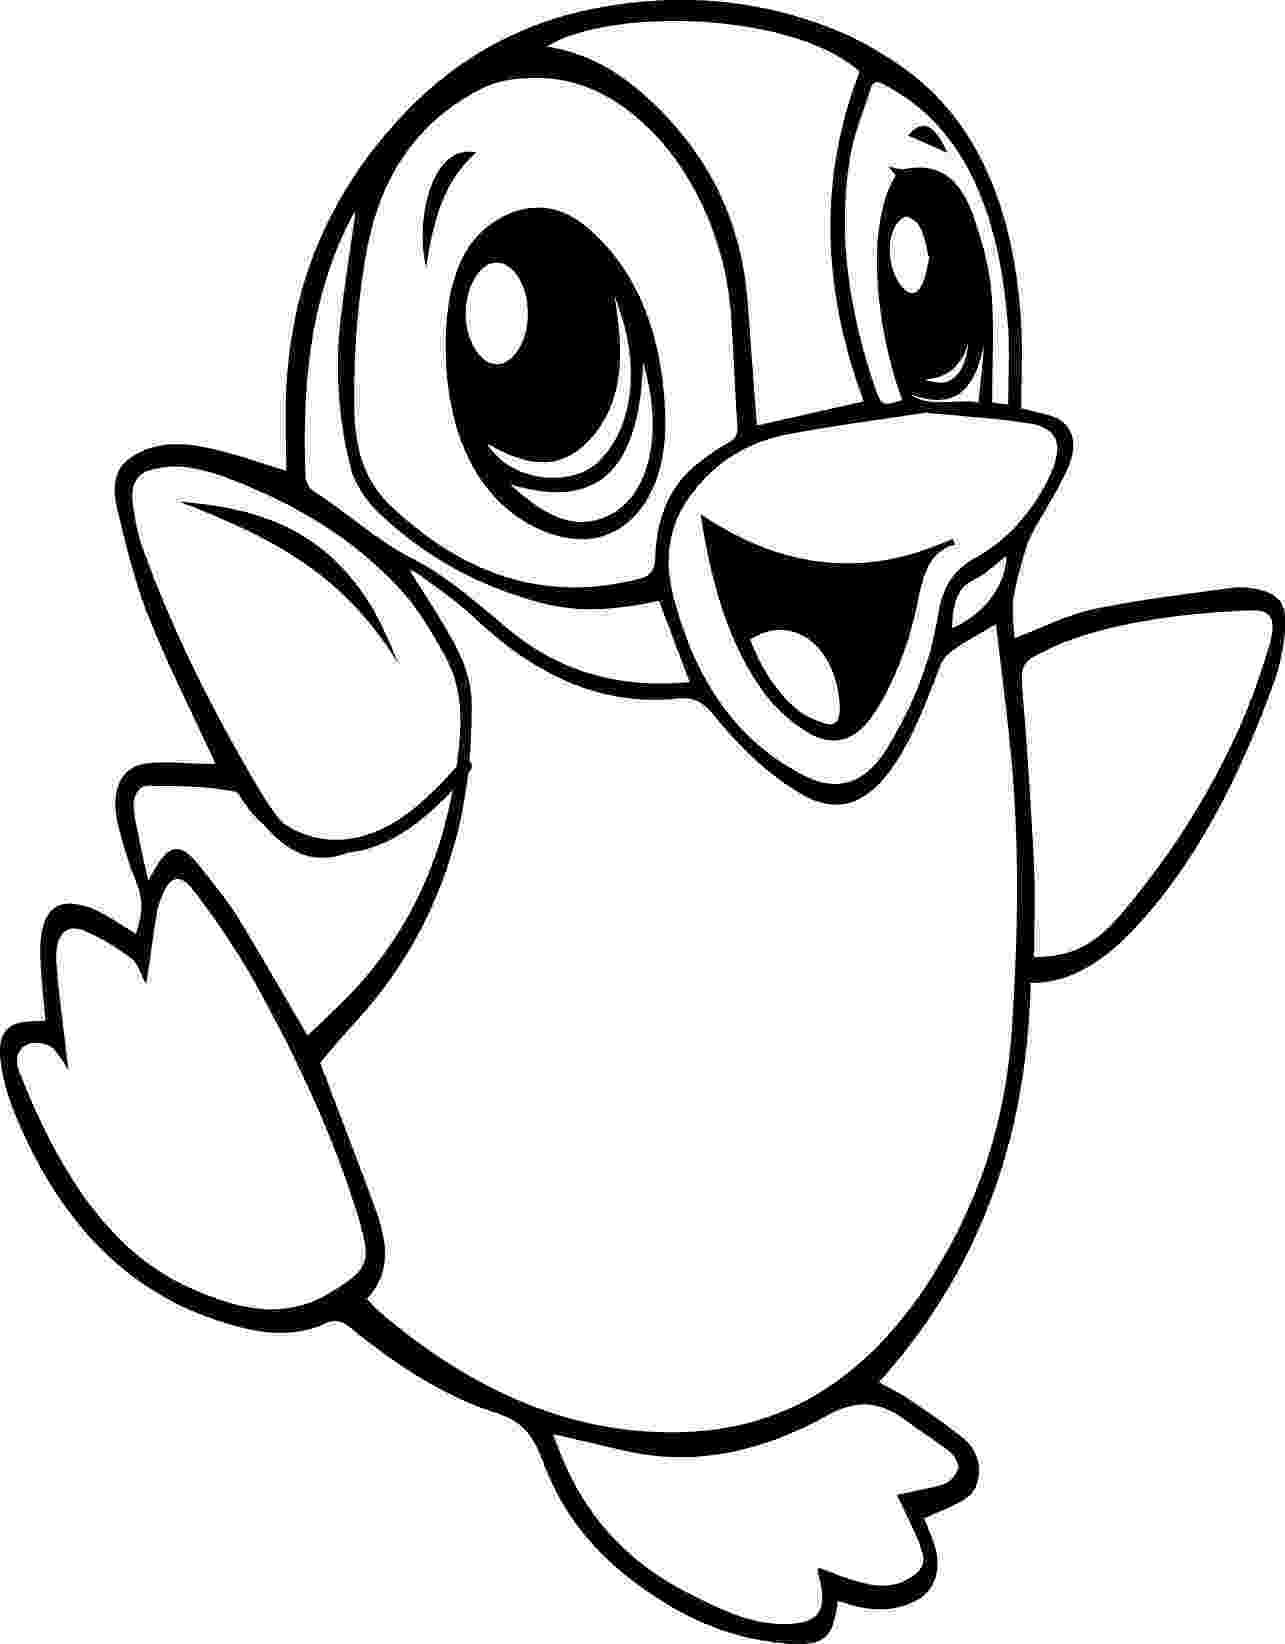 baby animals to color cute animal coloring pages best coloring pages for kids color animals baby to 